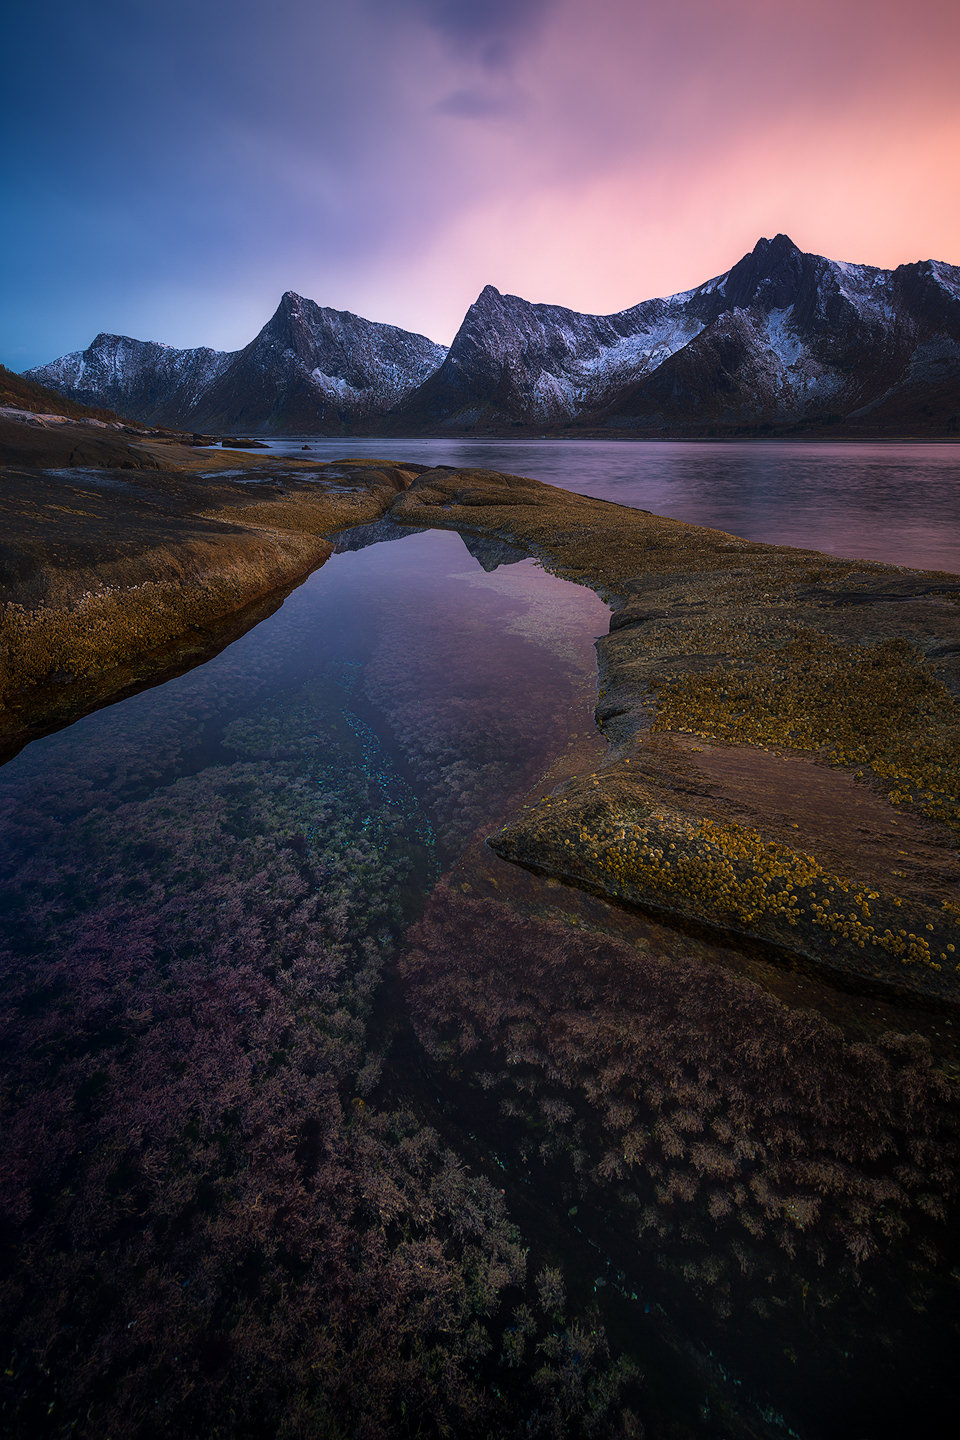 Senja's snowcapped mountains reflected in a tidepool full of life.